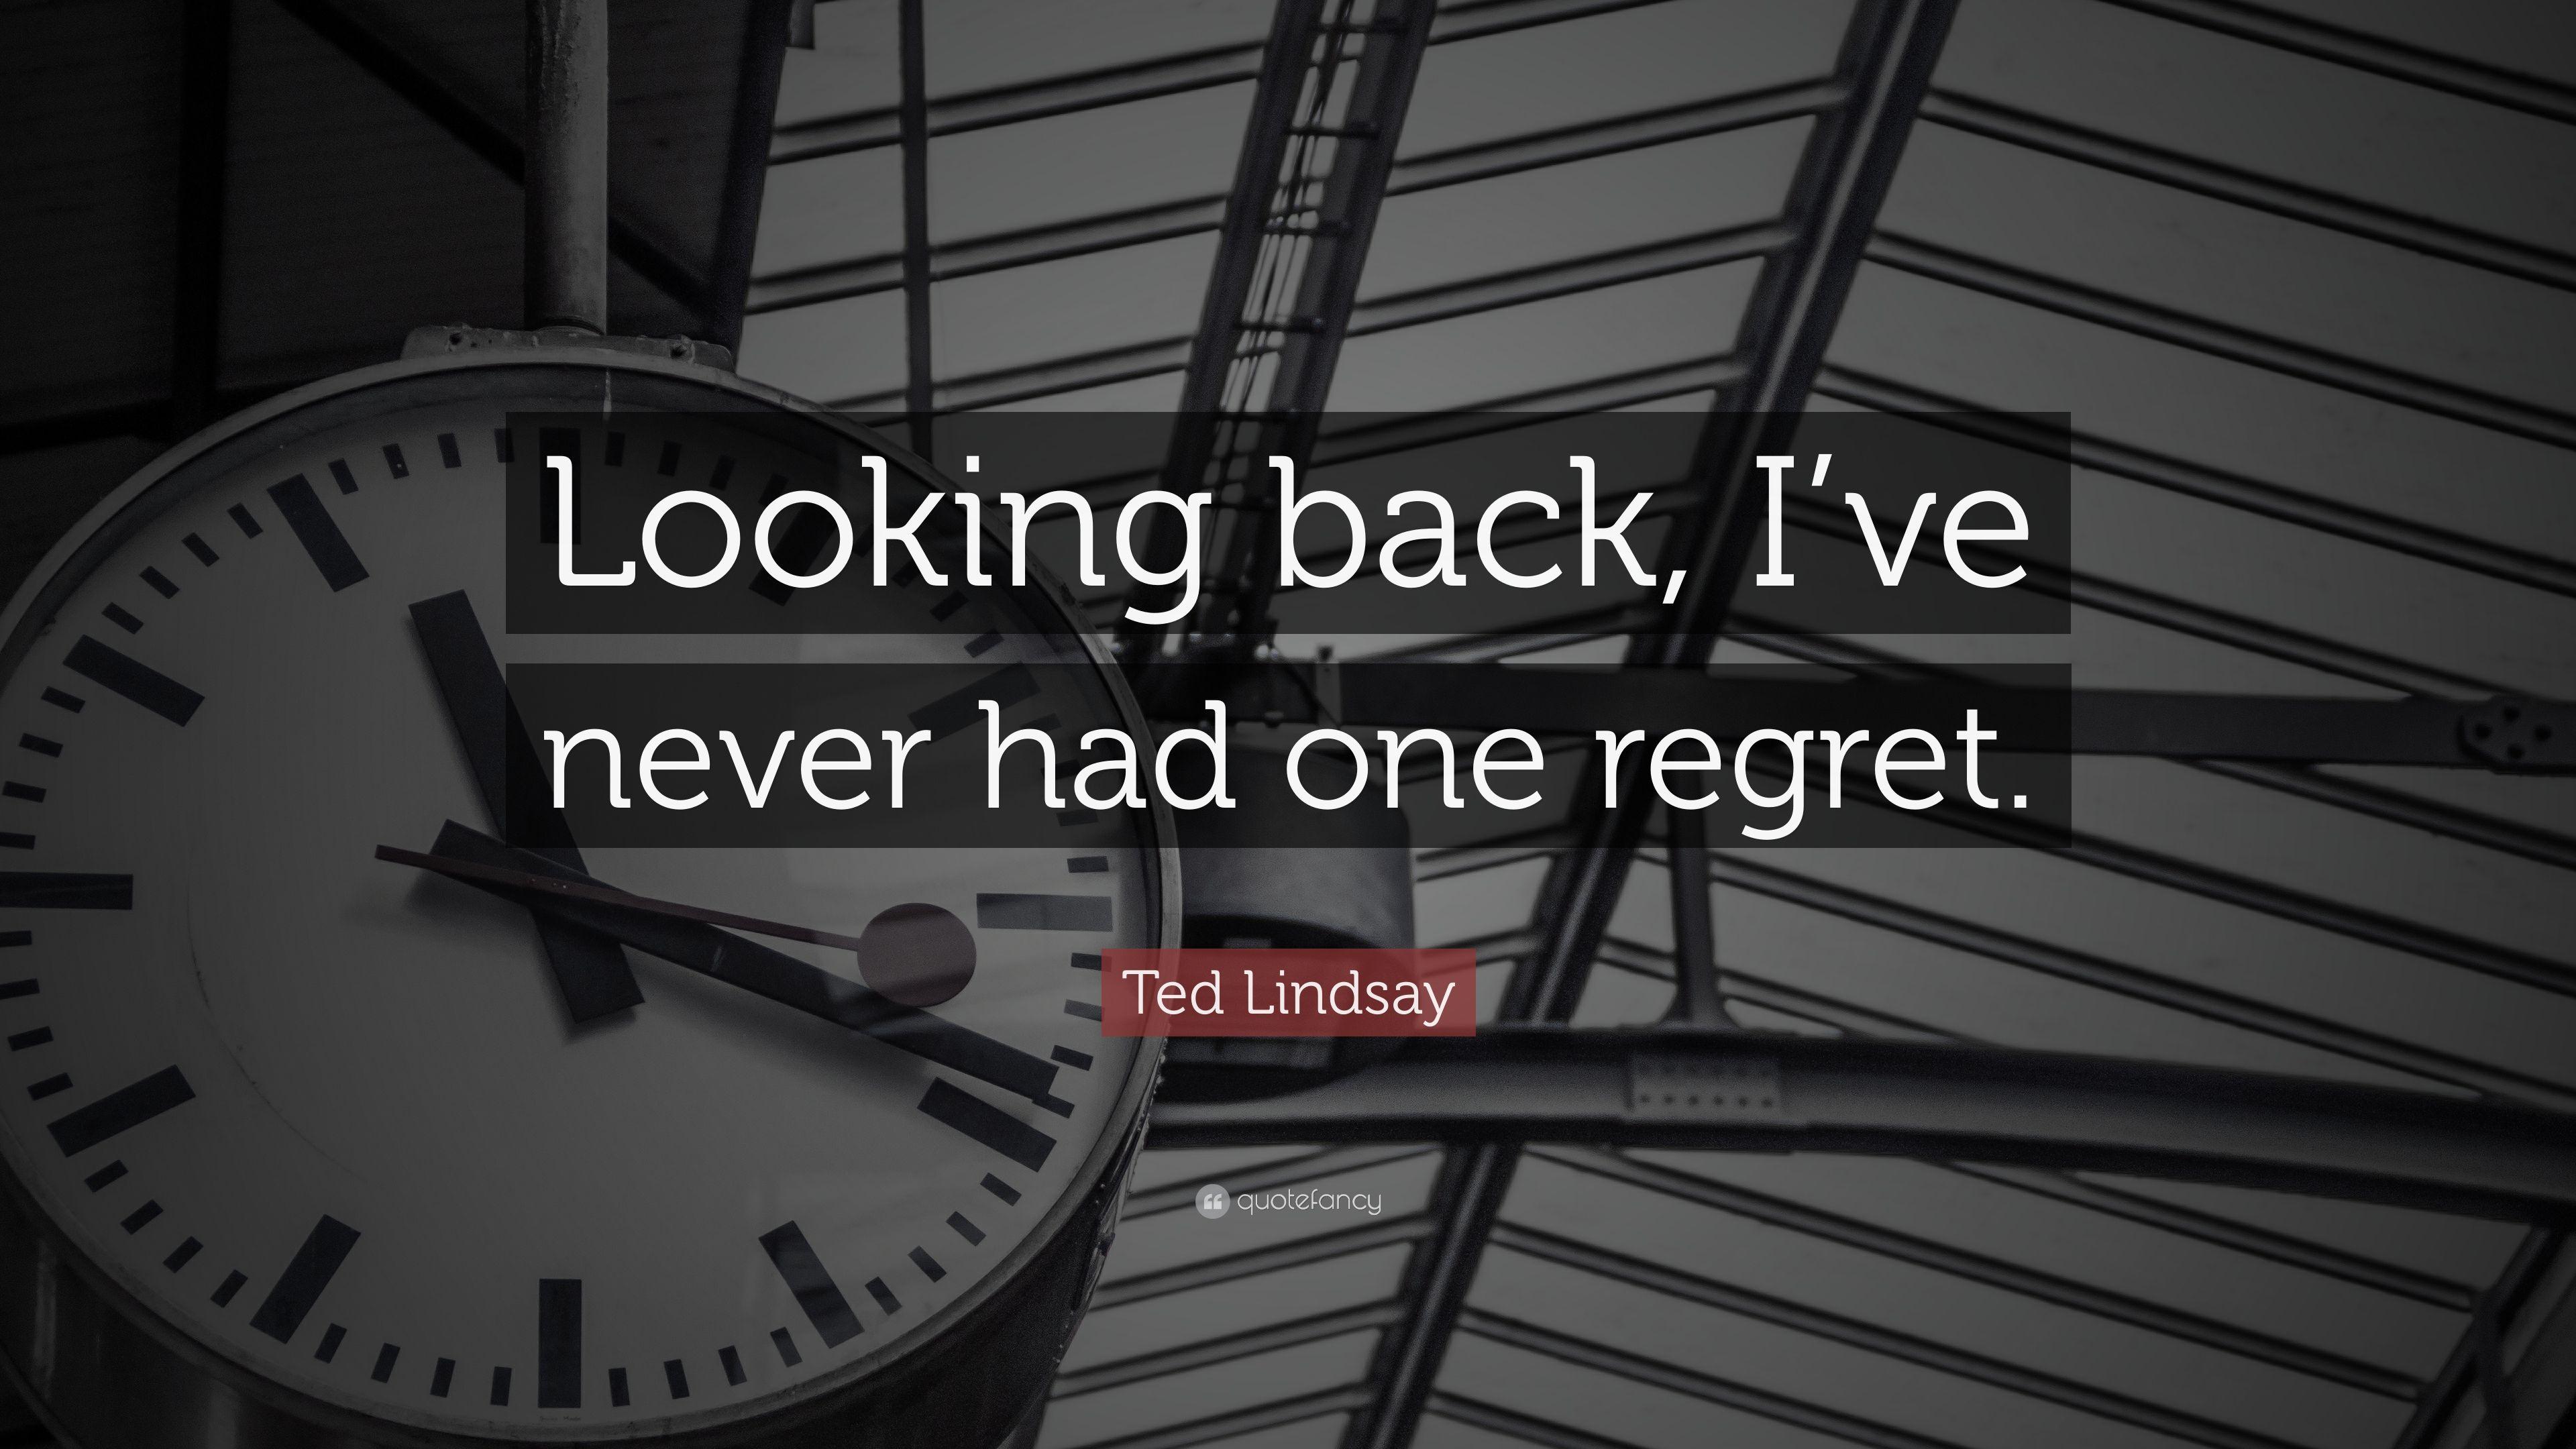 Ted Lindsay Quote: “Looking back, I've never had one regret.” 7